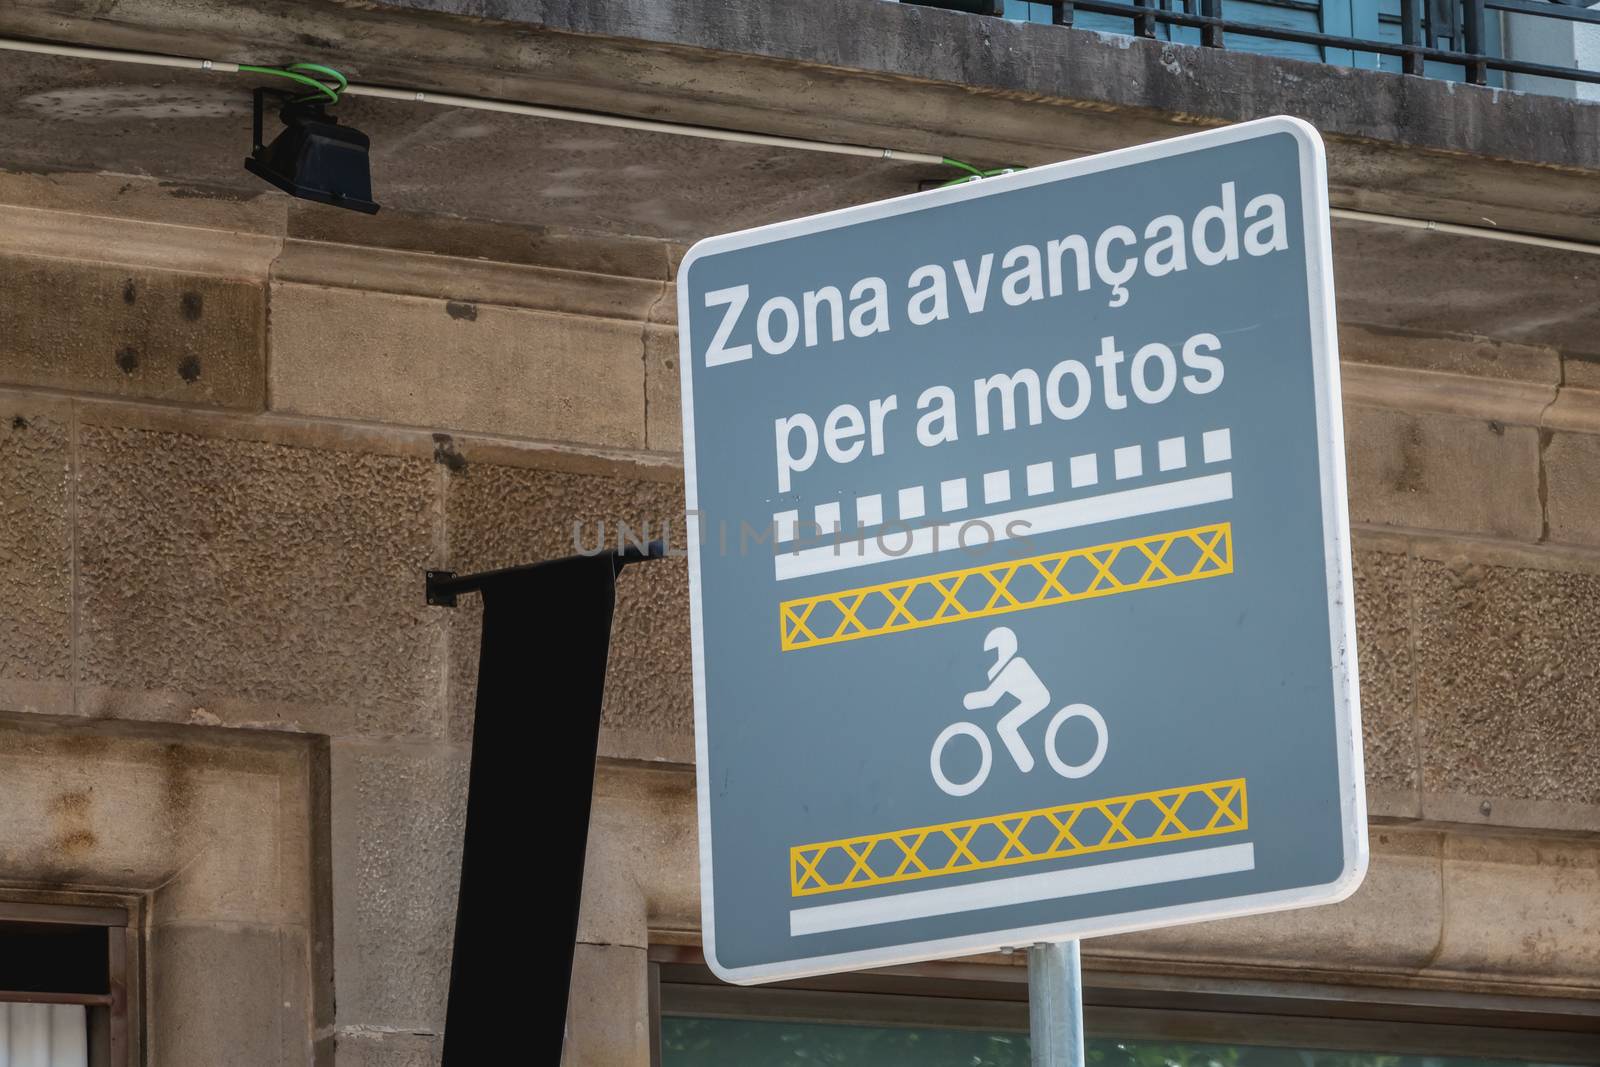 road sign indicating a zone reserved for motorcycles in Barcelon by AtlanticEUROSTOXX